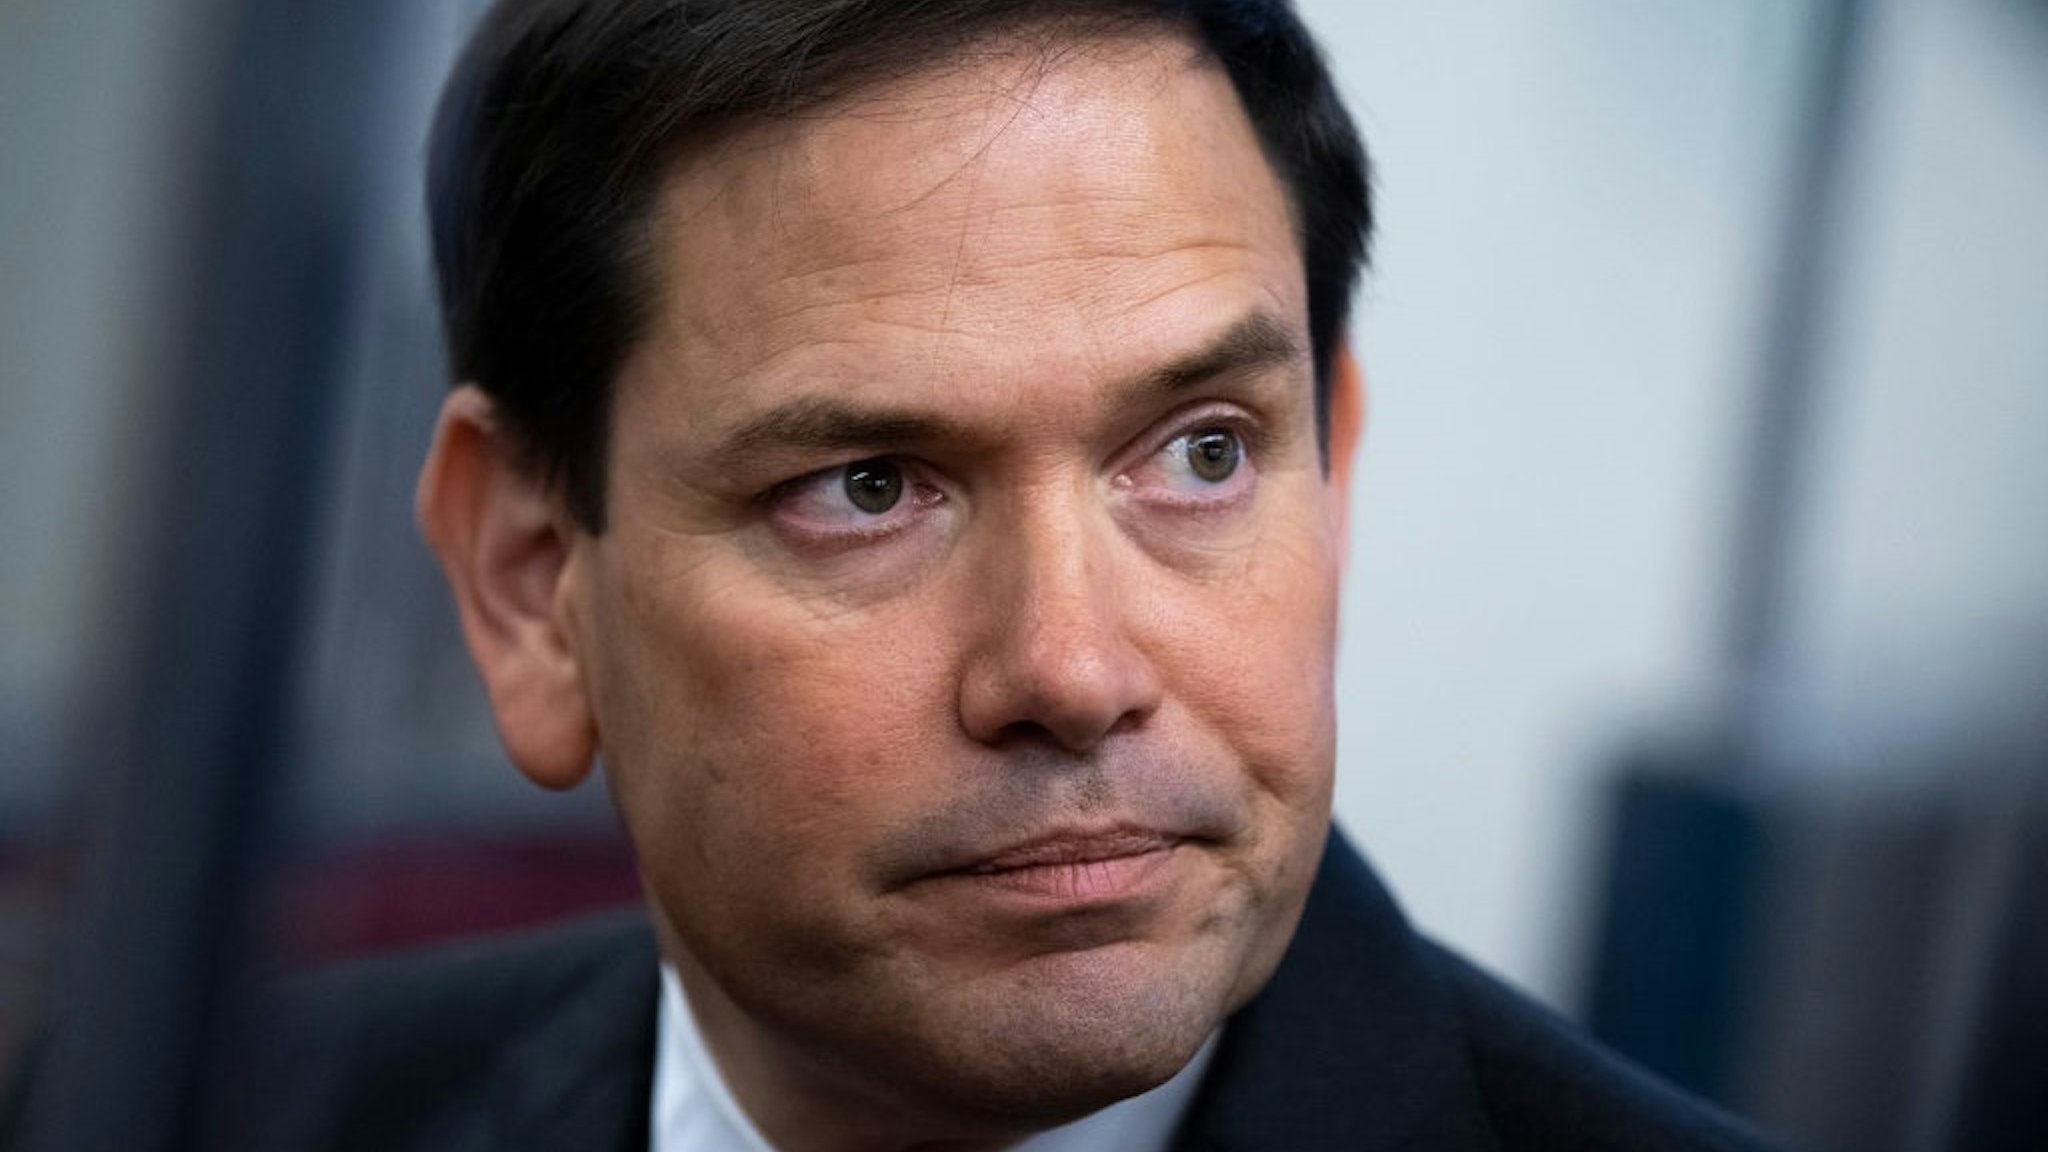 UNITED STATES - OCTOBER 5: Sen. Marco Rubio, R-Fla., is seen in the U.S. Capitol on Tuesday, October 5, 2021.